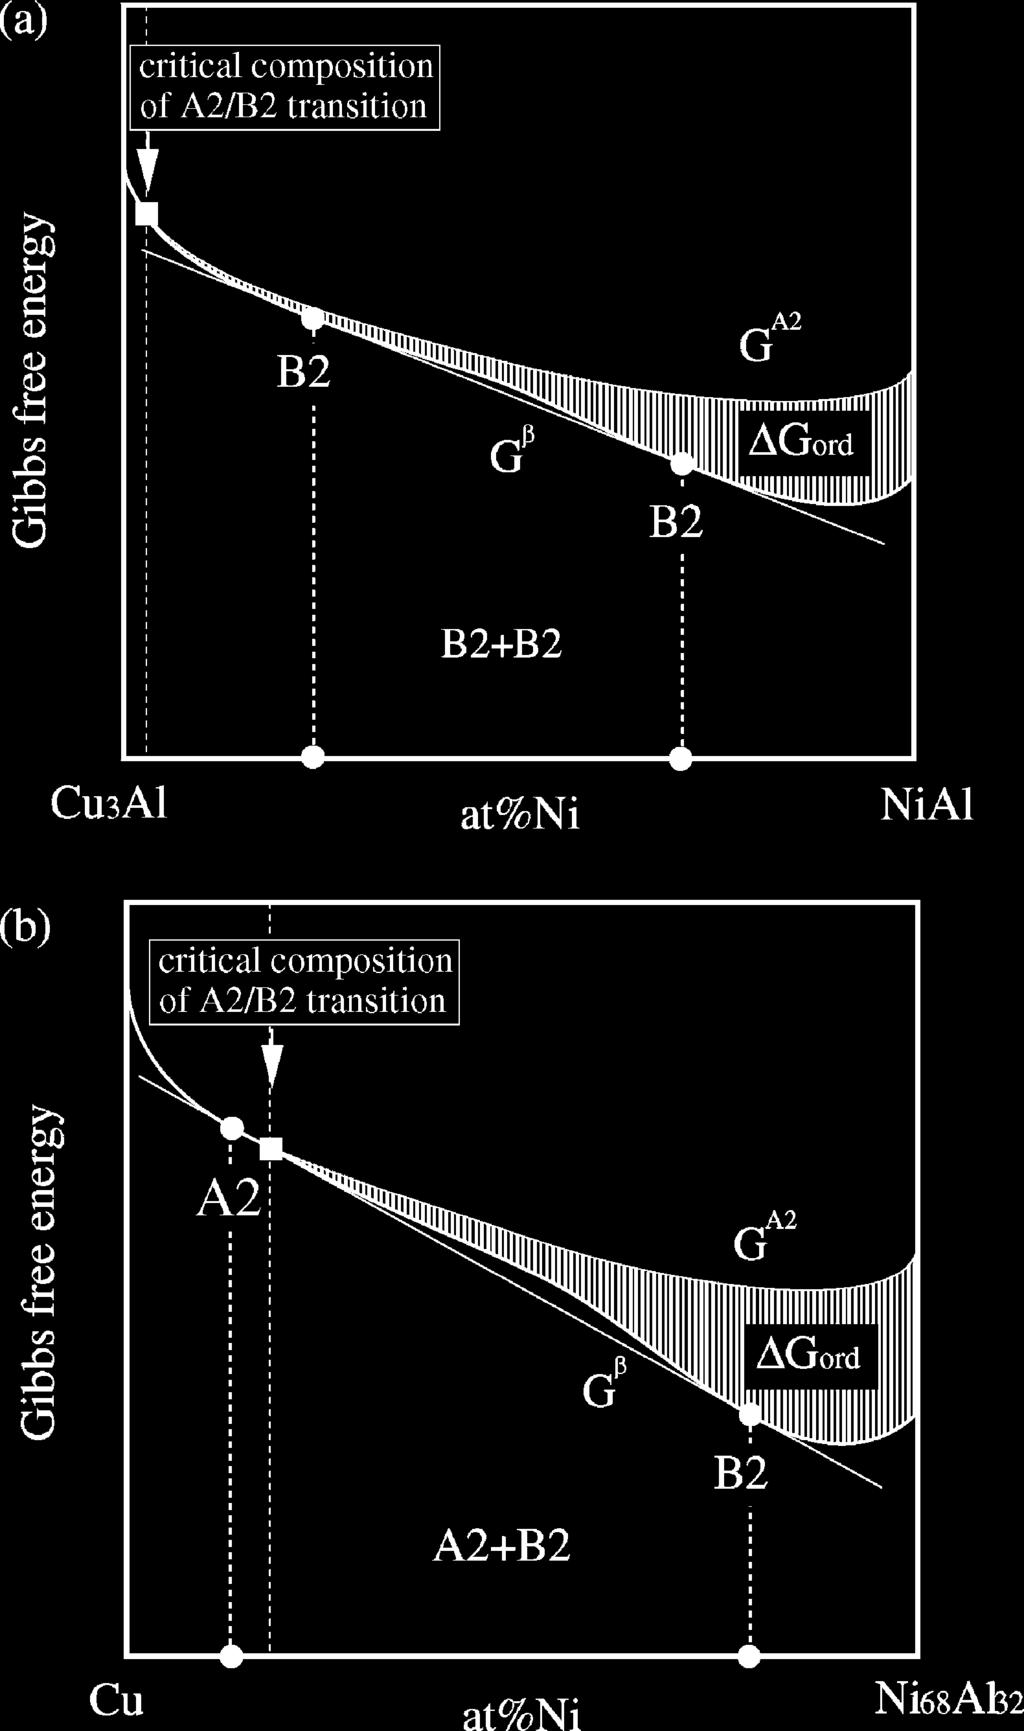 660 R. Kainuma et al. / Intermetallics 13 (2005) 655 661 Fig. 10. Schematic illustration showing the Gibbs free energies of the bcc phase along (a) the Cu 3 Al NiAl and (b) Cu Ni 68 Al 32 sections.